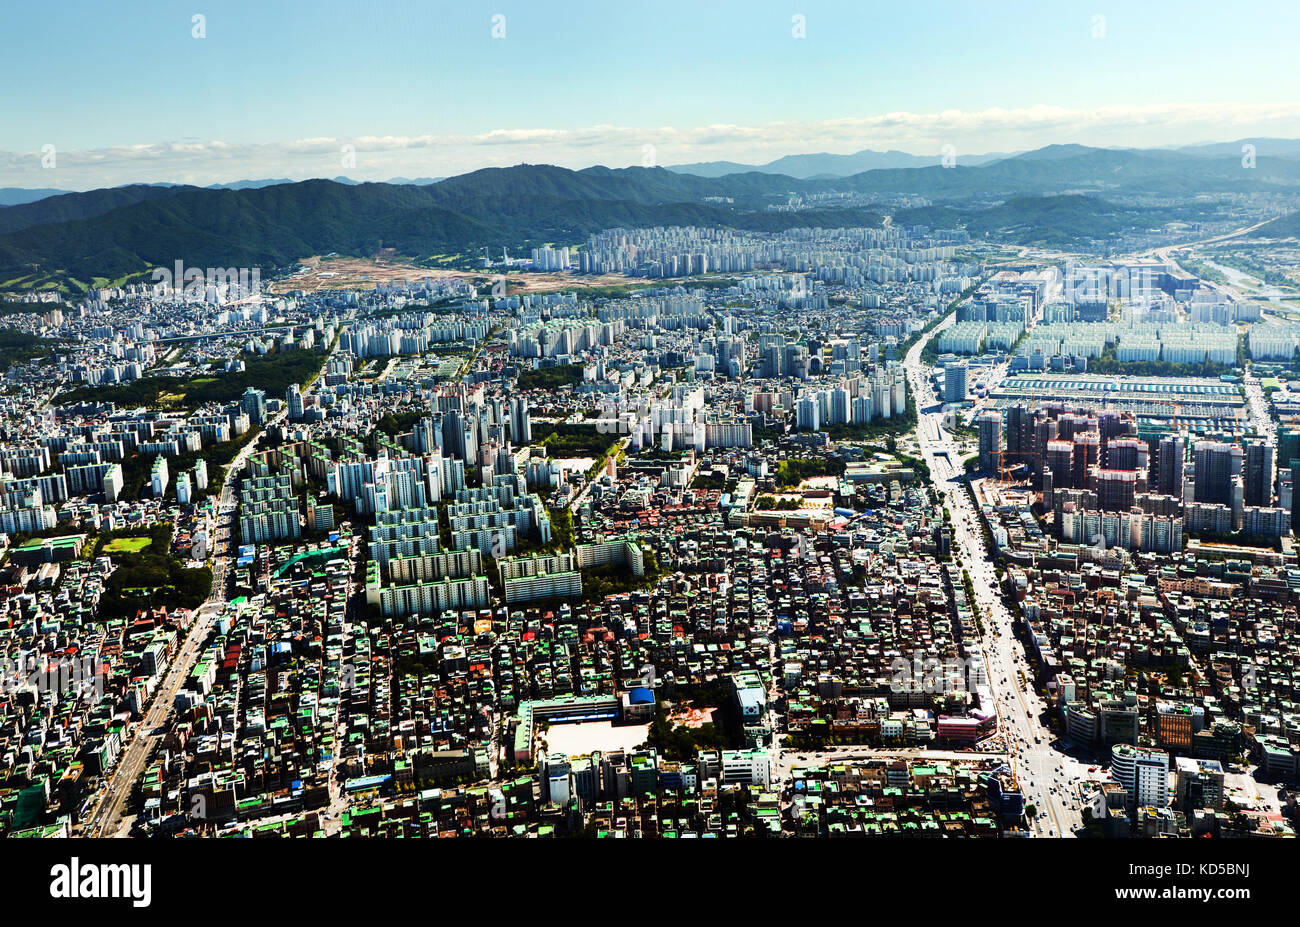 An aeiral view of the Southern neighborhoods of Seoul. Stock Photo